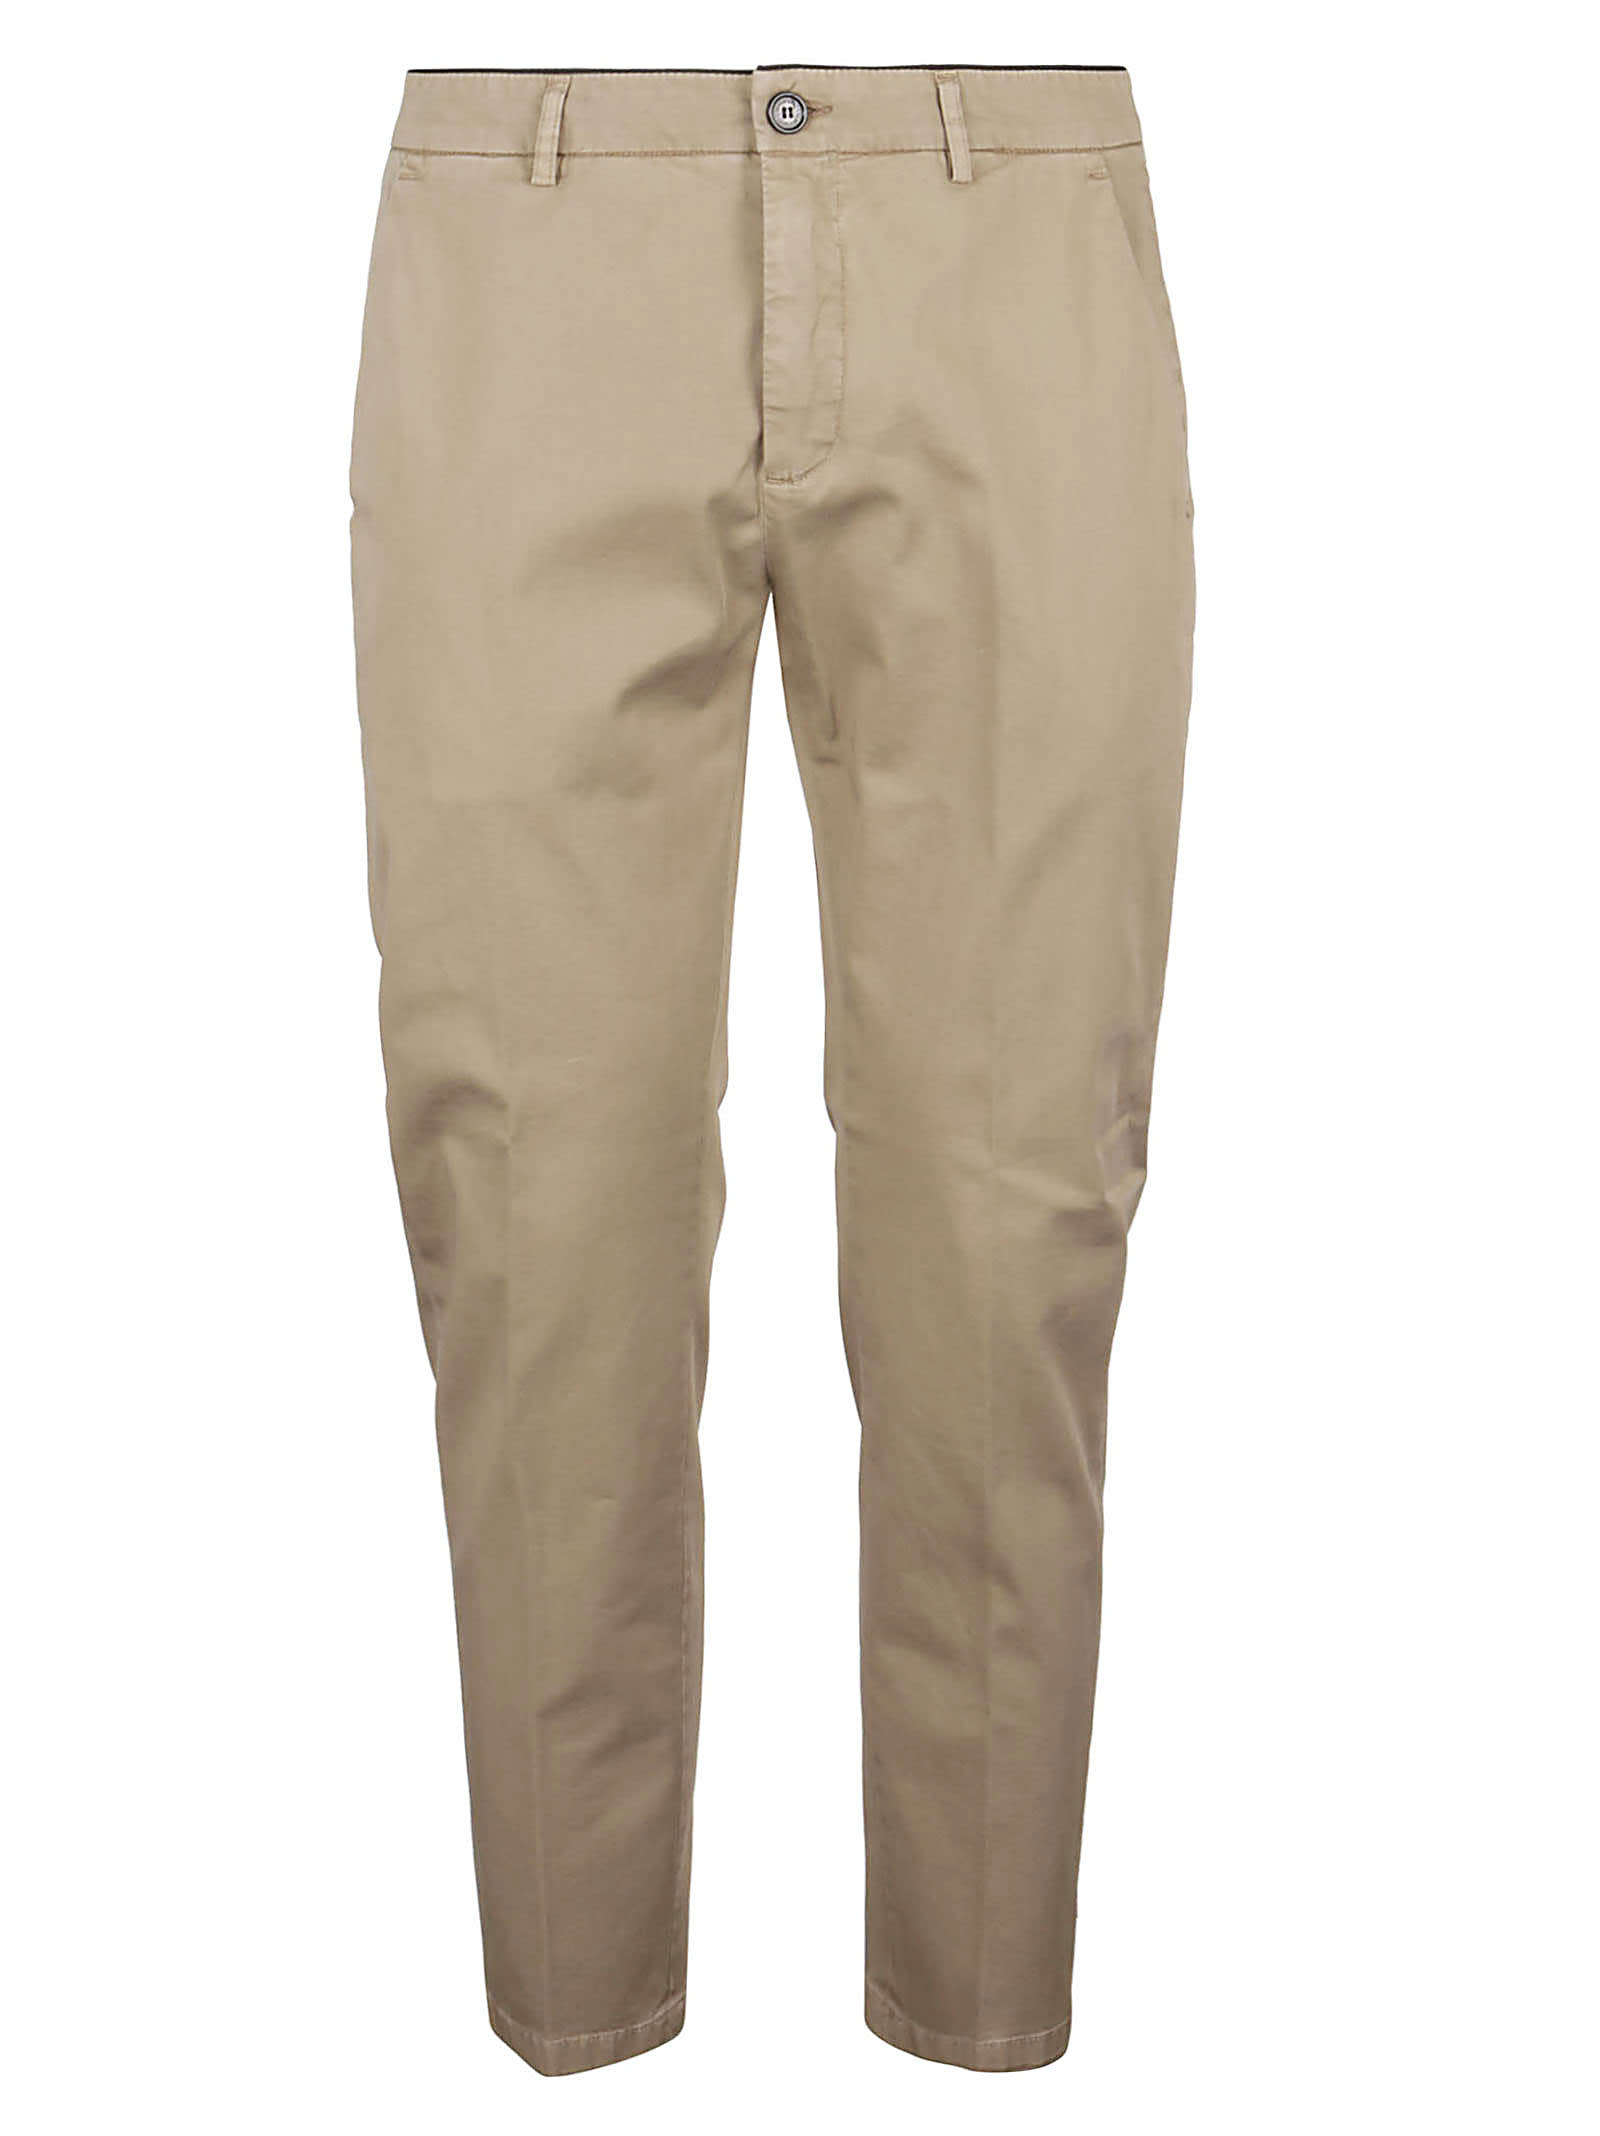 Department Five Prince Pant Chinos